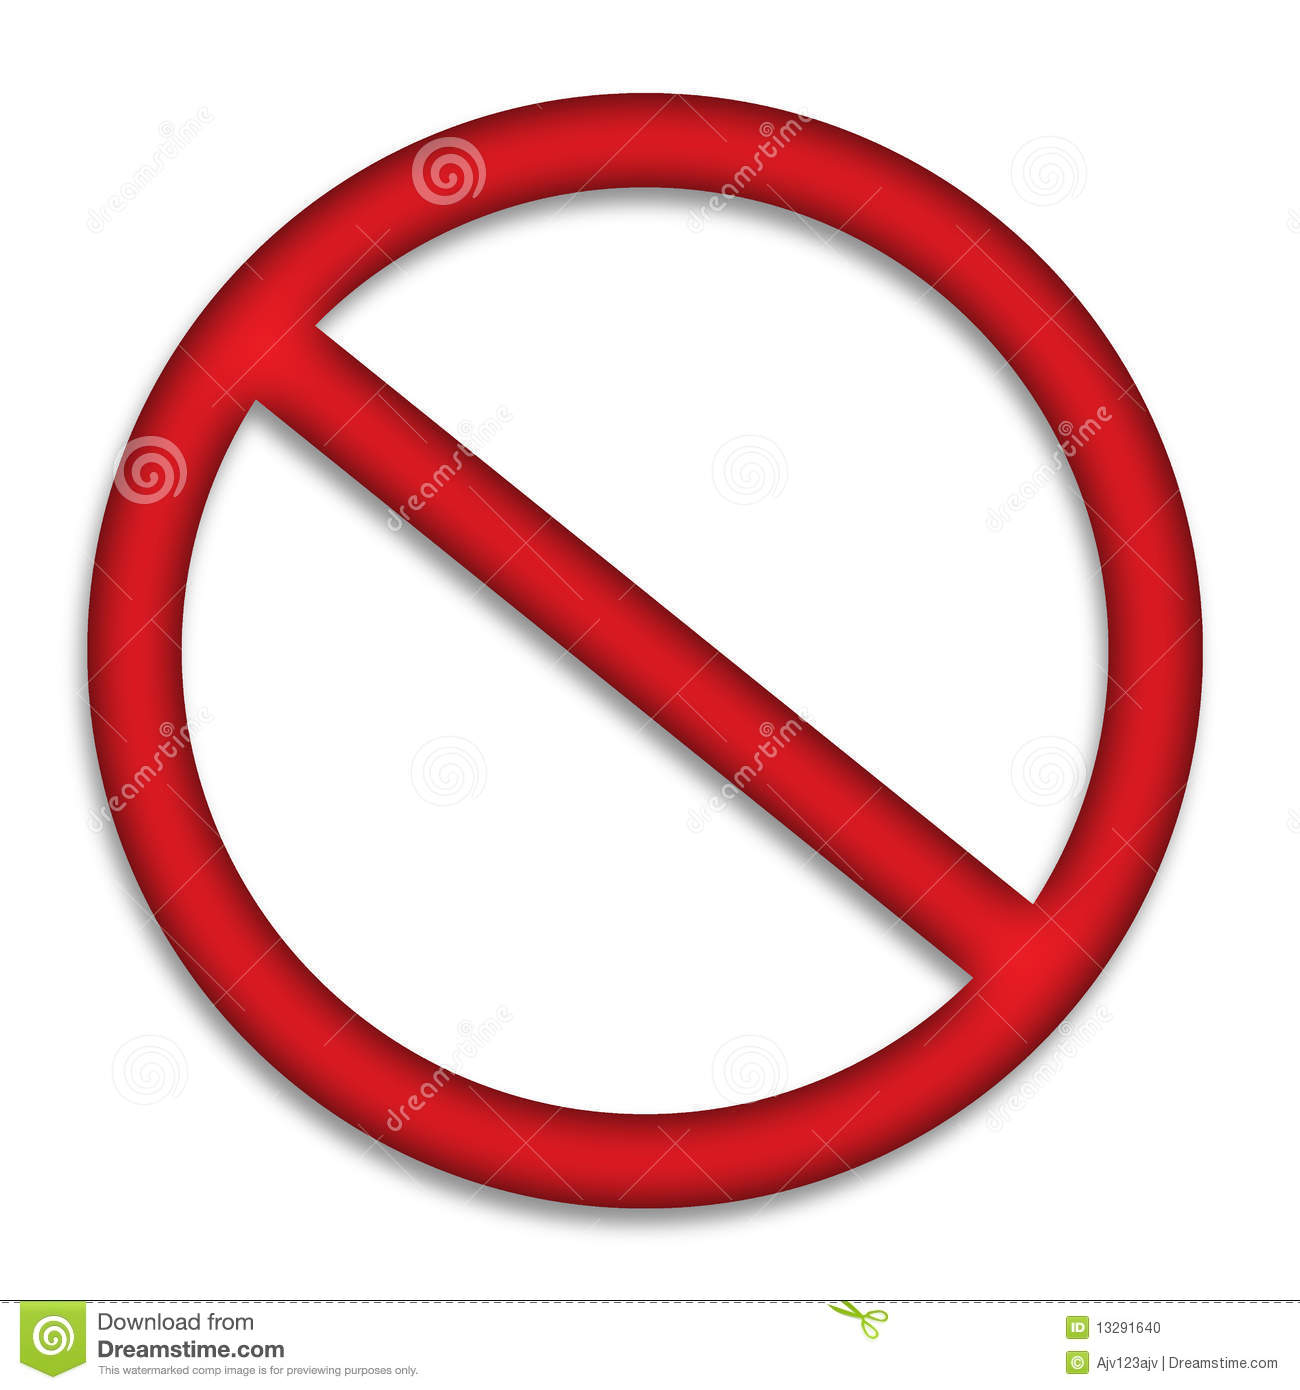 An Image Showing A No Entry Or No Admittance Red Sign On A White    